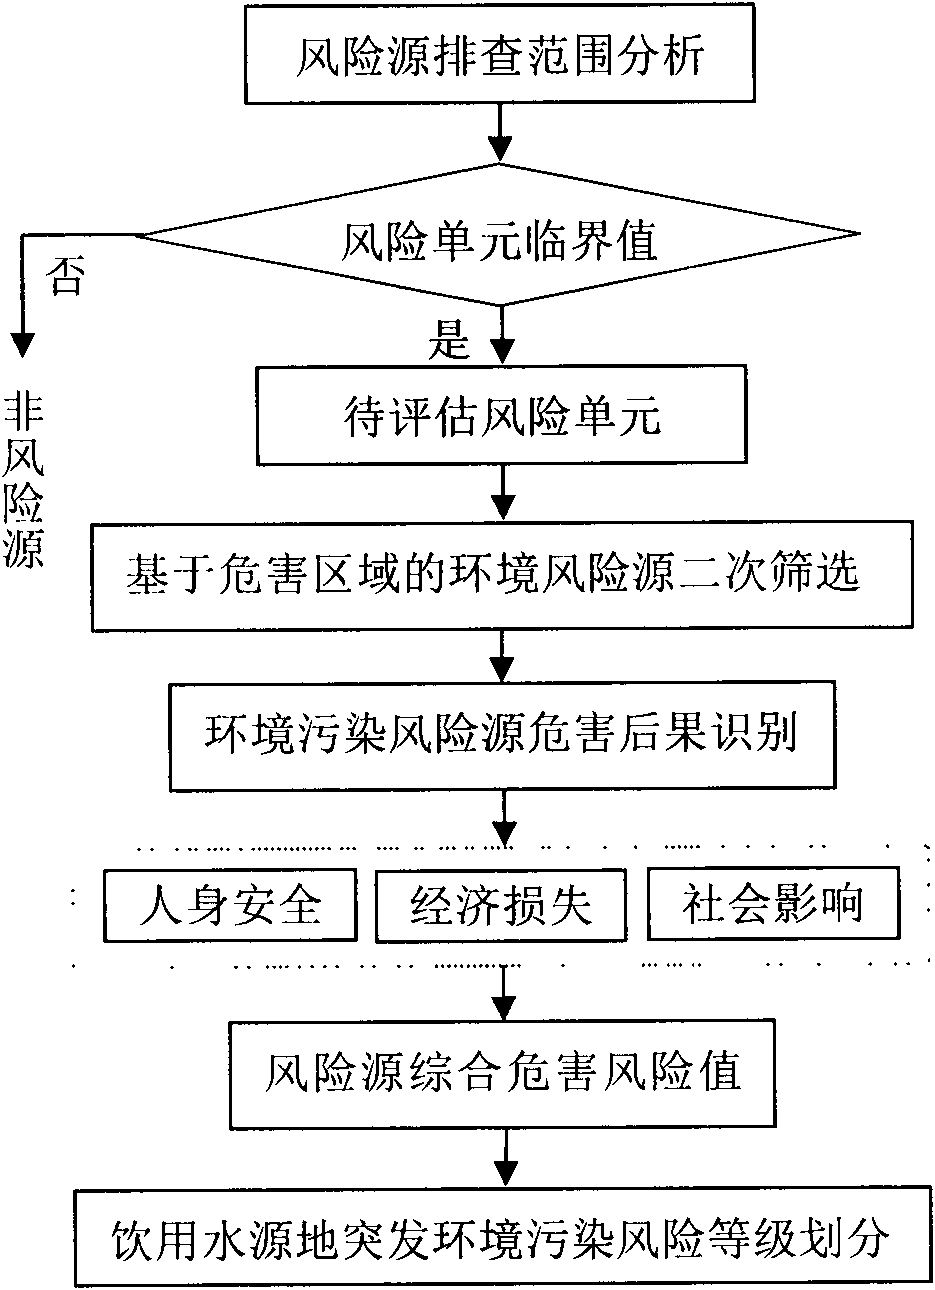 Method for diagnosing and grading risk of sudden pollution accident at drinking water source